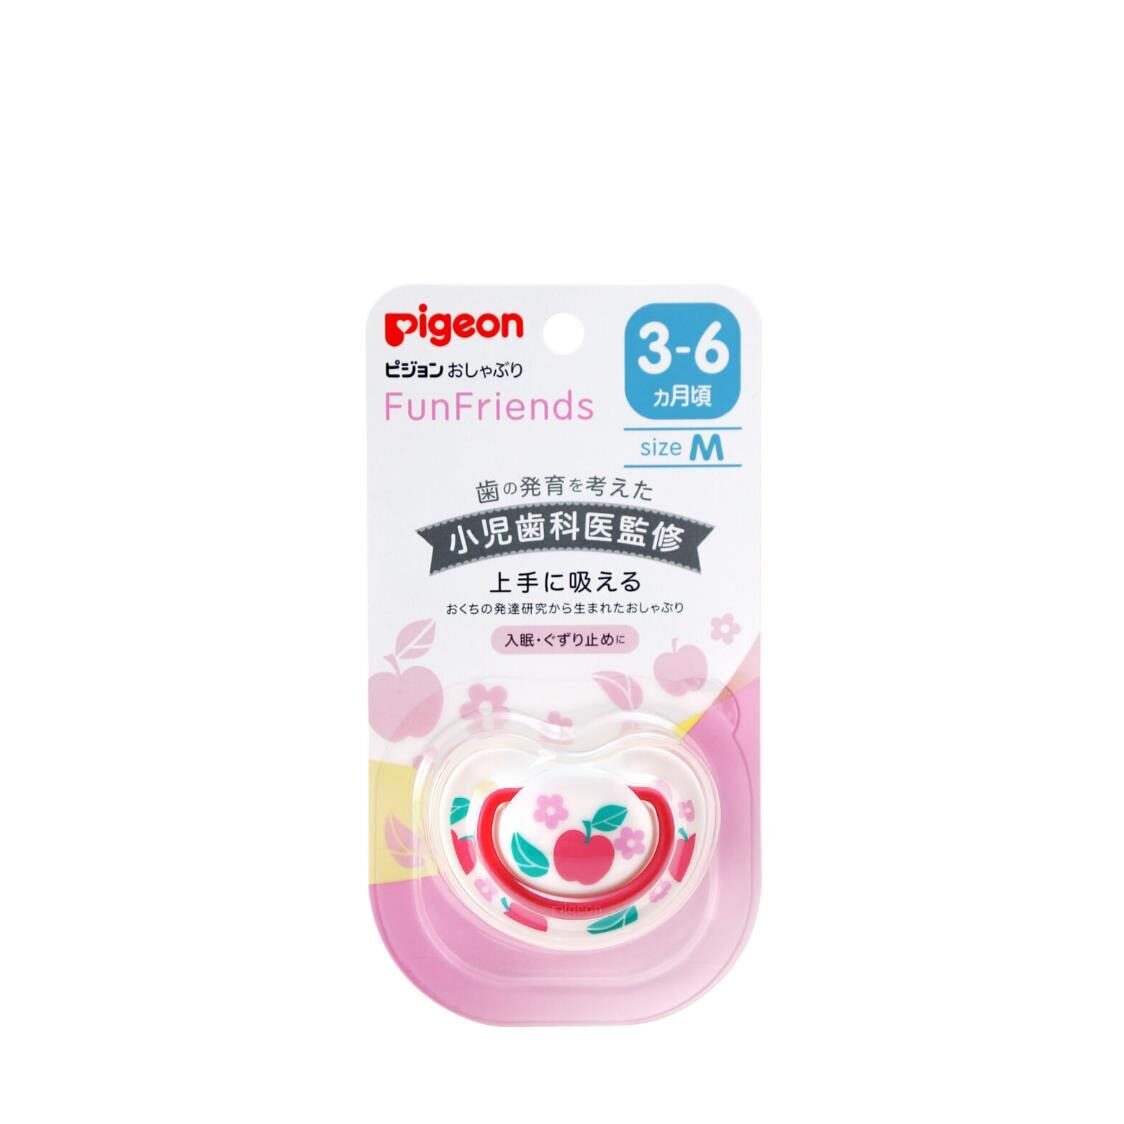 Pigeon Soother Funfriends M Size Apple Jp